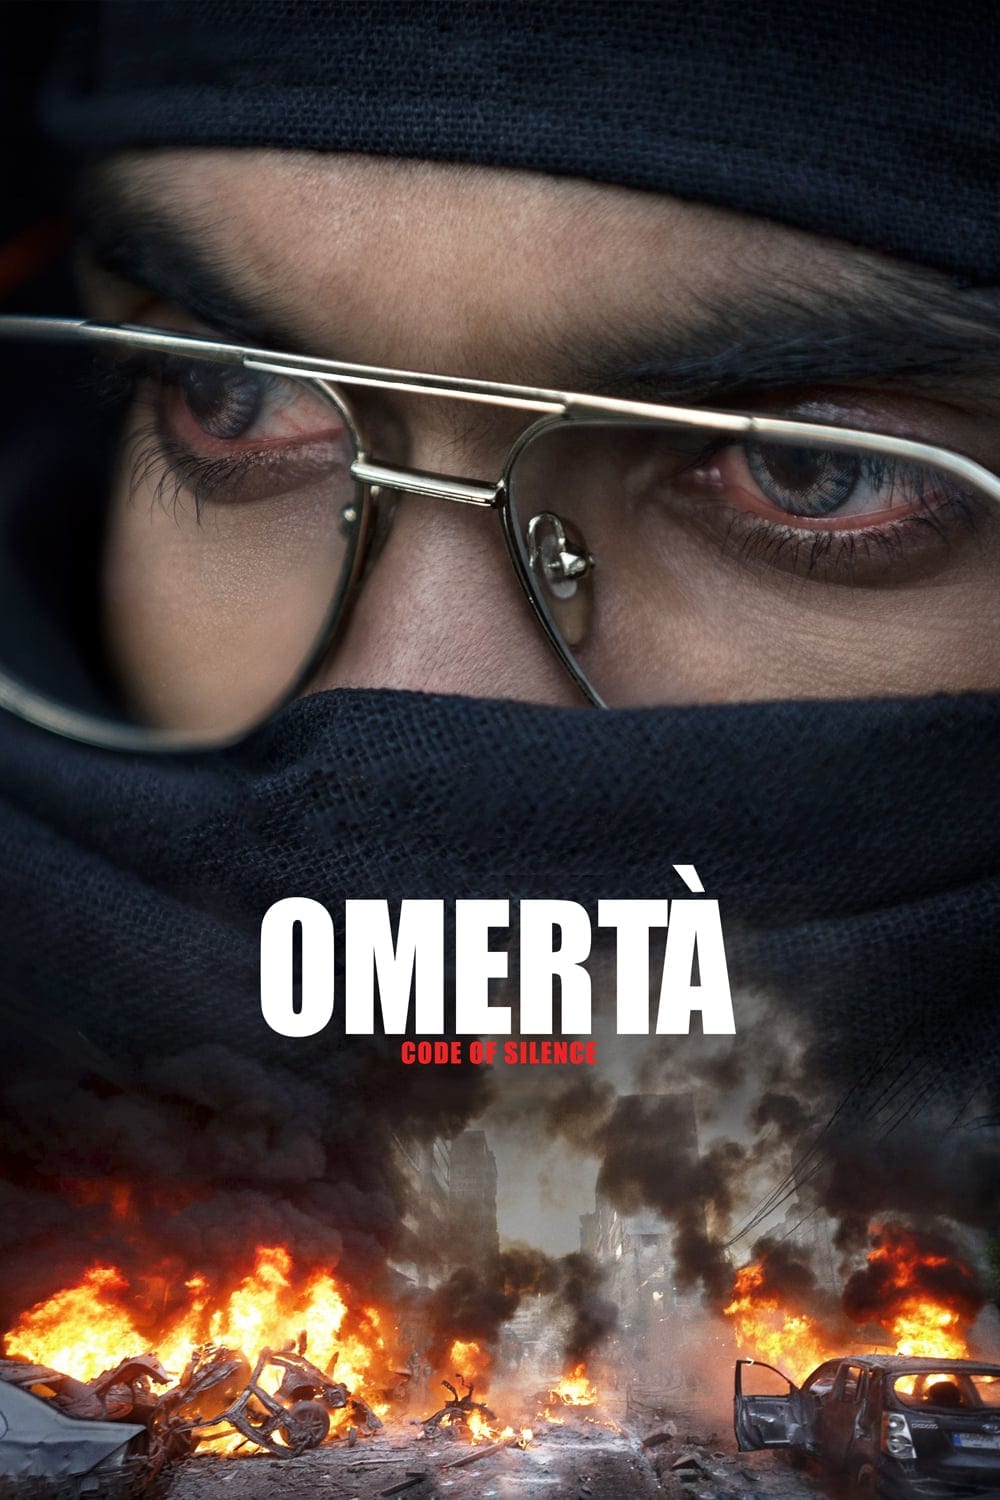 Poster for the movie "Omerta"